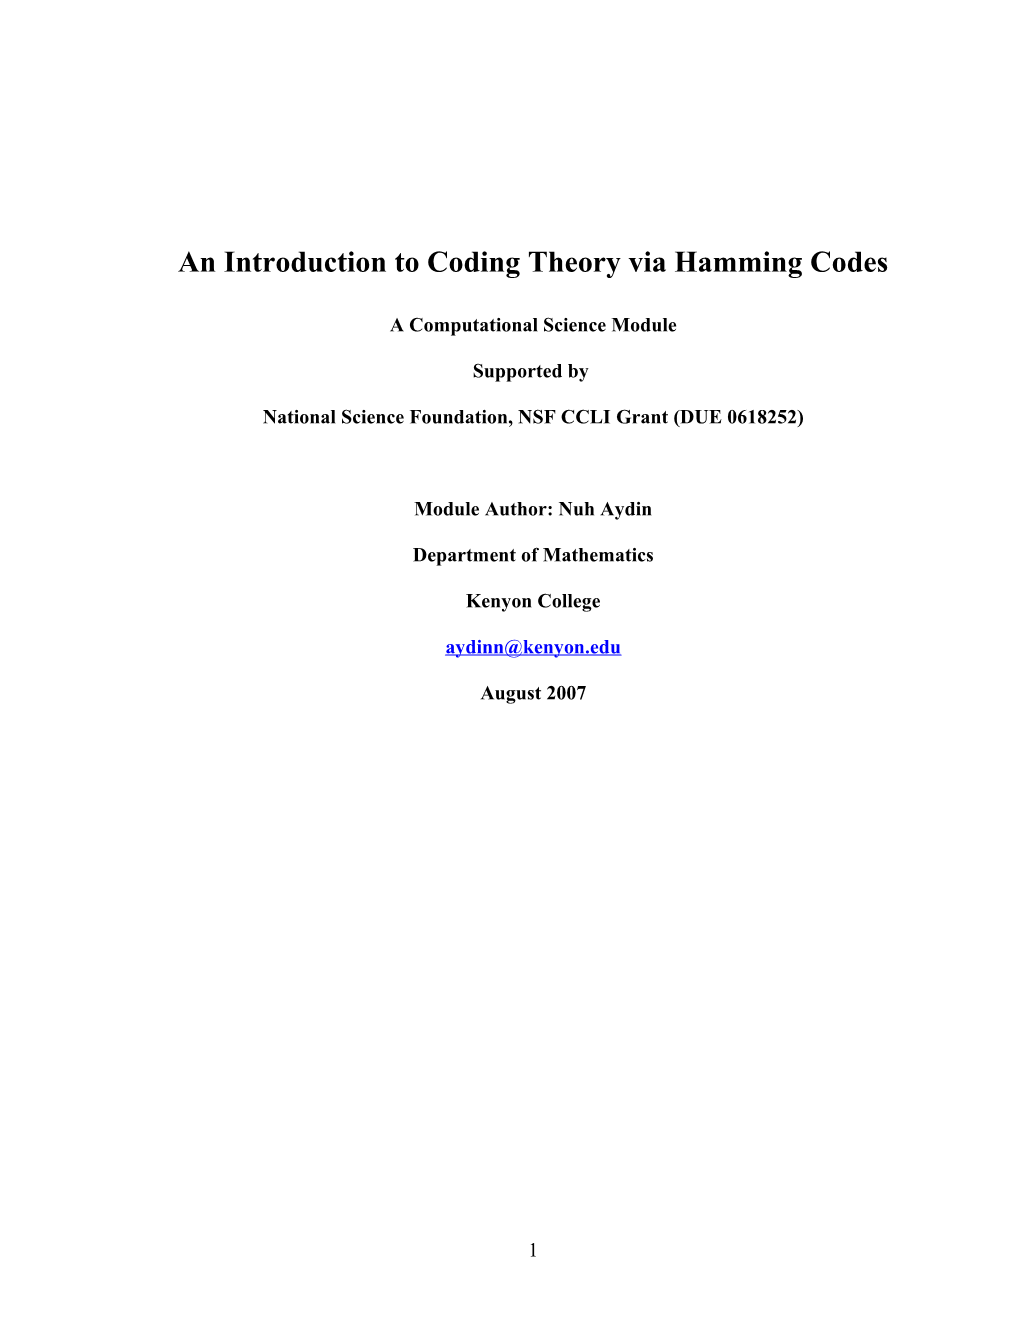 A Great Course to Enhance Undergraduate Mathematics Curriculum: Coding Theory and Cryptography